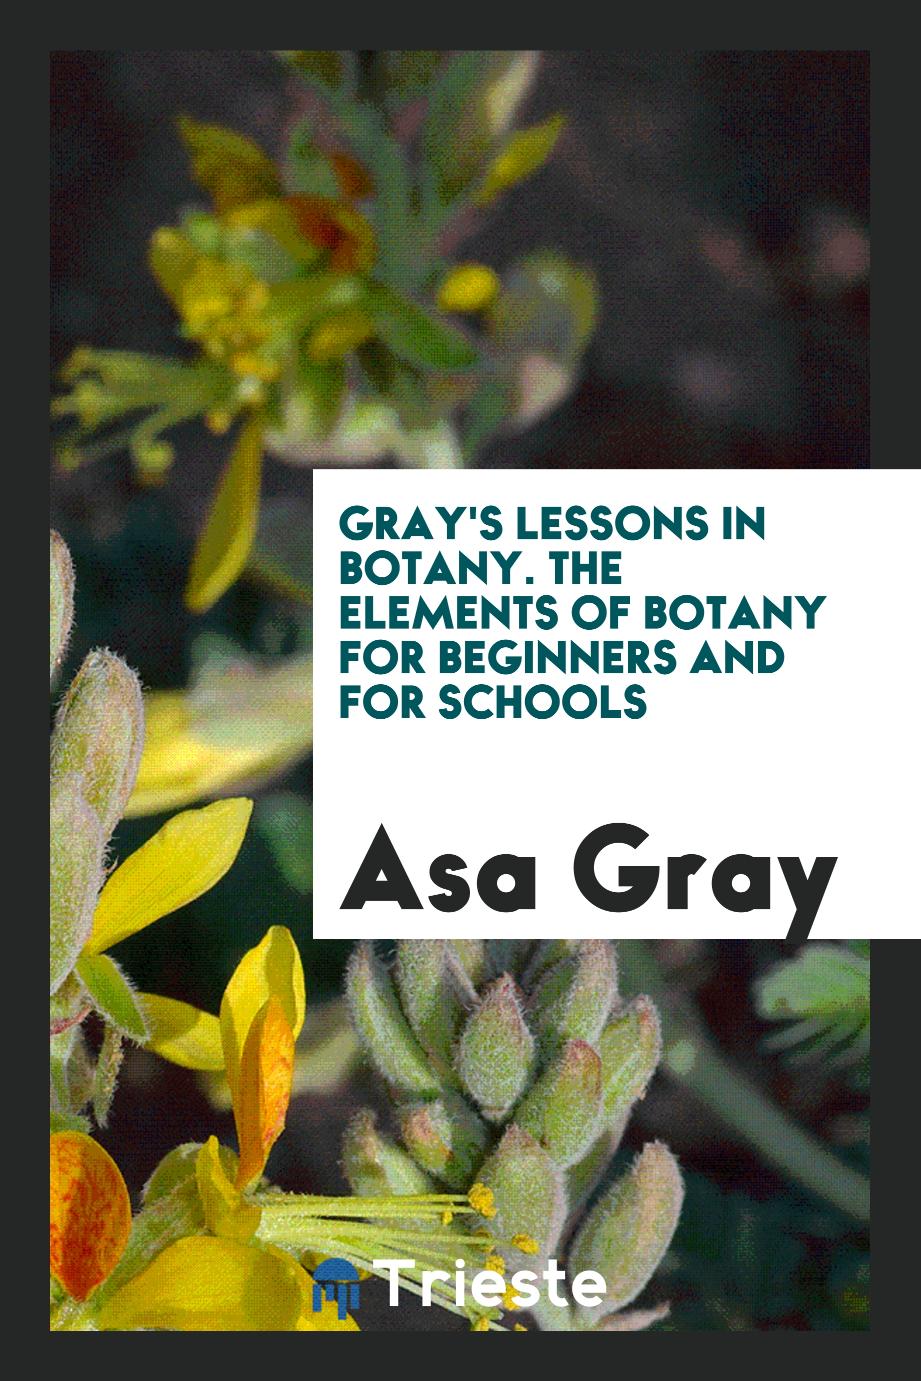 Asa Gray - Gray's Lessons in Botany. The Elements of Botany for Beginners and for Schools